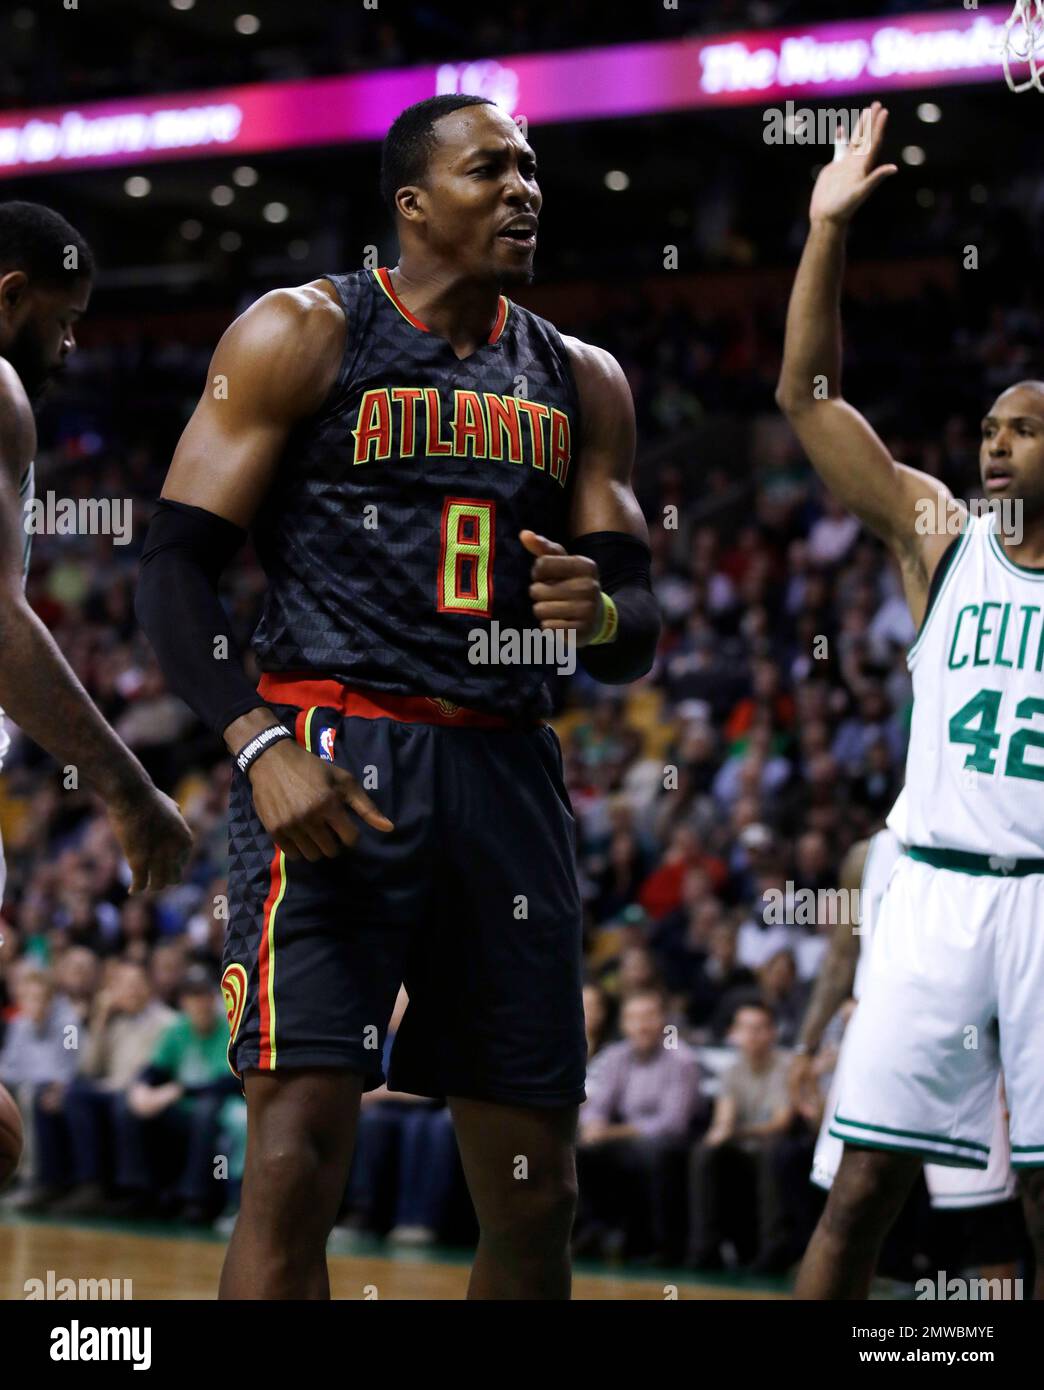 Atlanta Hawks center Dwight Howard (8) pumps his fist after a basket  against the Cleveland Cavaliers in the first half of a preseason NBA  basketball game, Monday, Oct. 10, 2016, in Atlanta. (